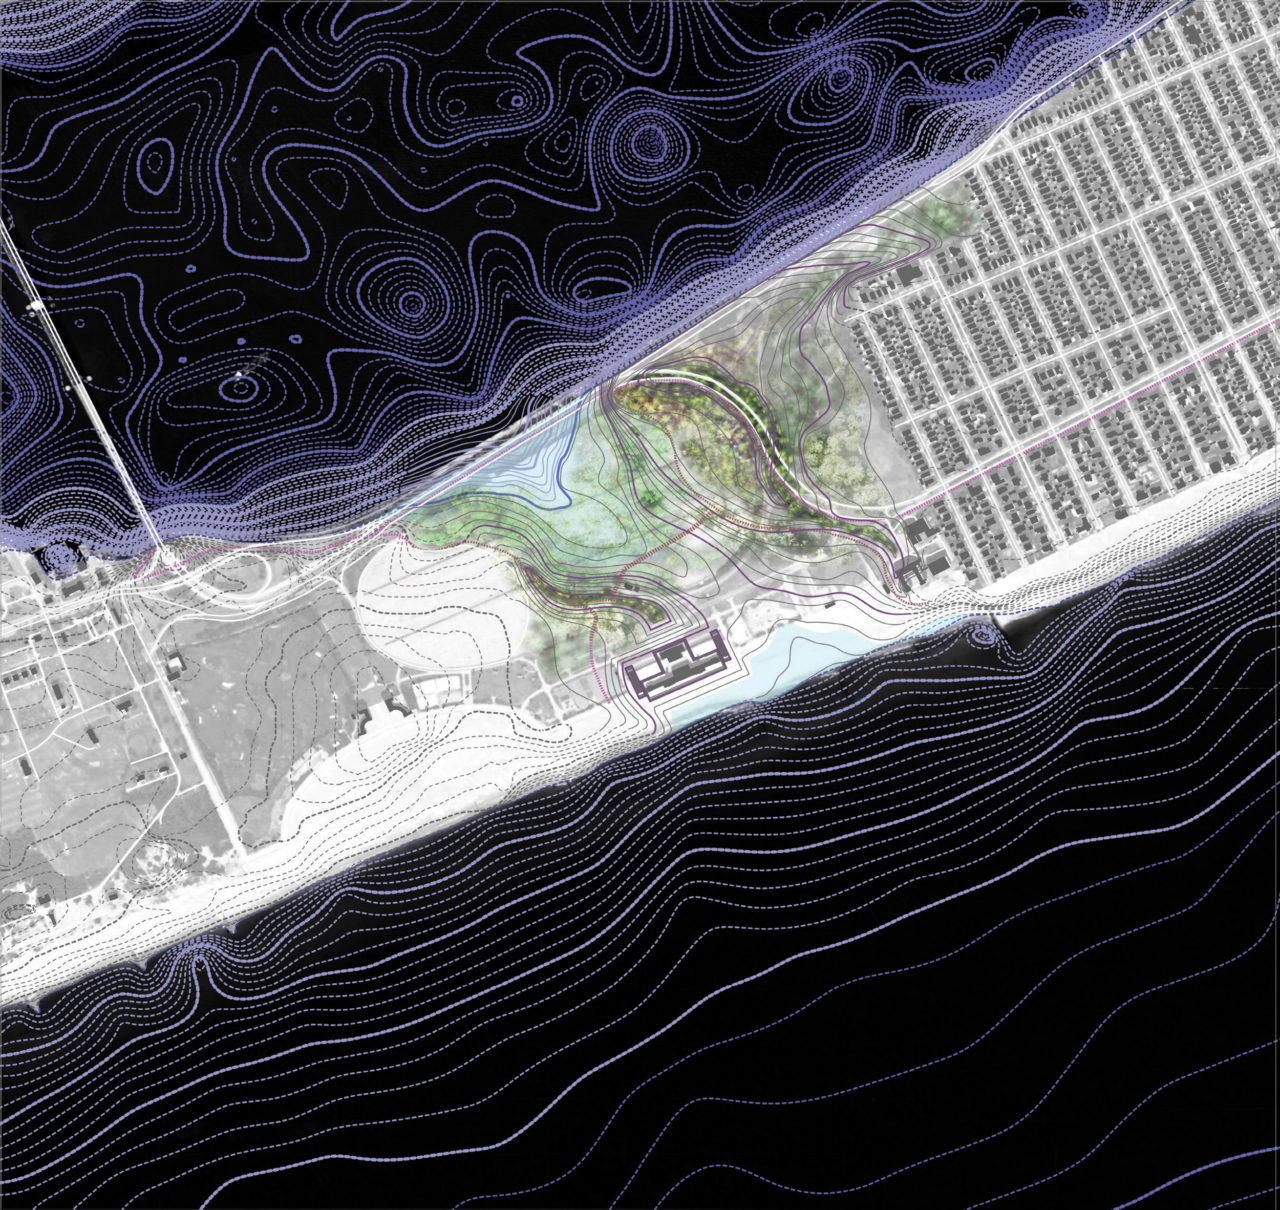 Rendering of the proposed Jacob Riis Overwash Plain in Jamaica Bay. The Overwash Plain is a strategy to improve water quality and hydrologic flow and circulation throughout the bay.